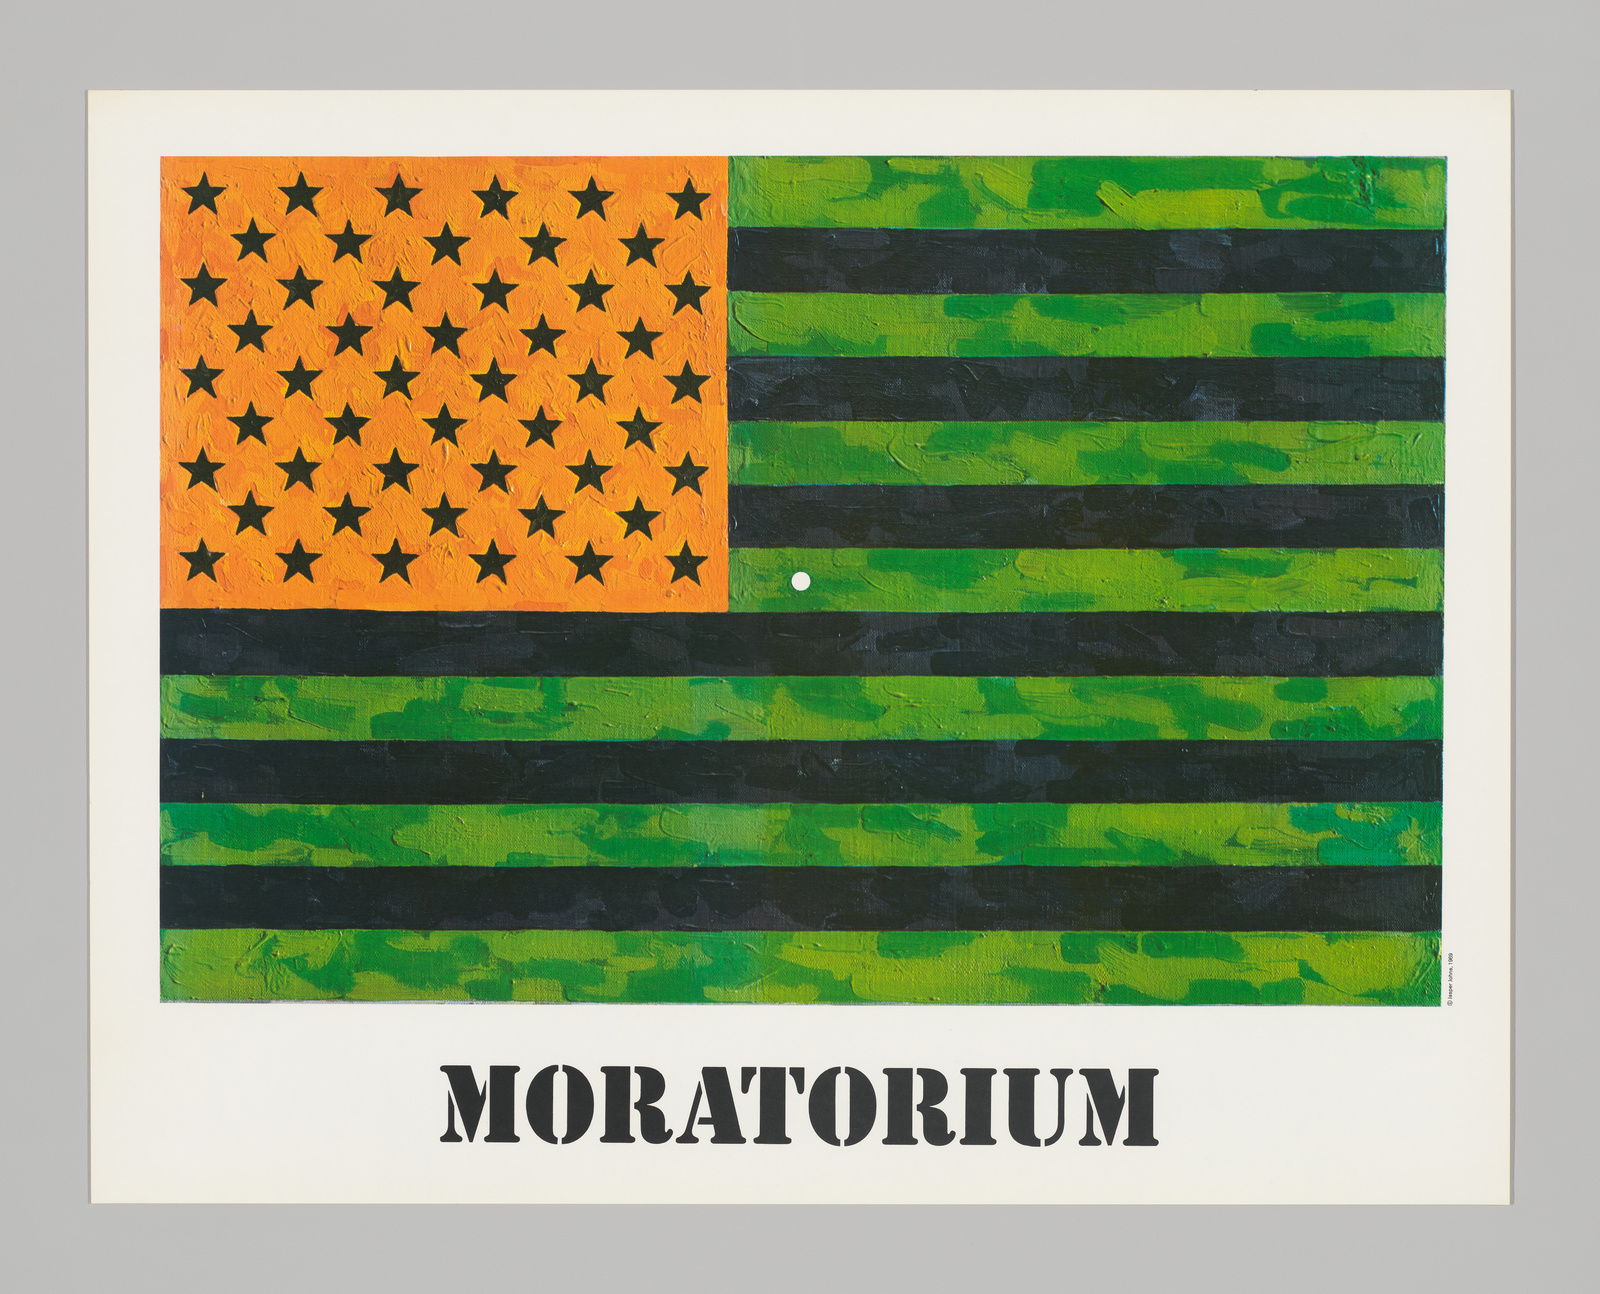 A fifty-starred American flag rendered in orange with black stars and black and green stripes, over a stencil of the word "MORATORIUM."